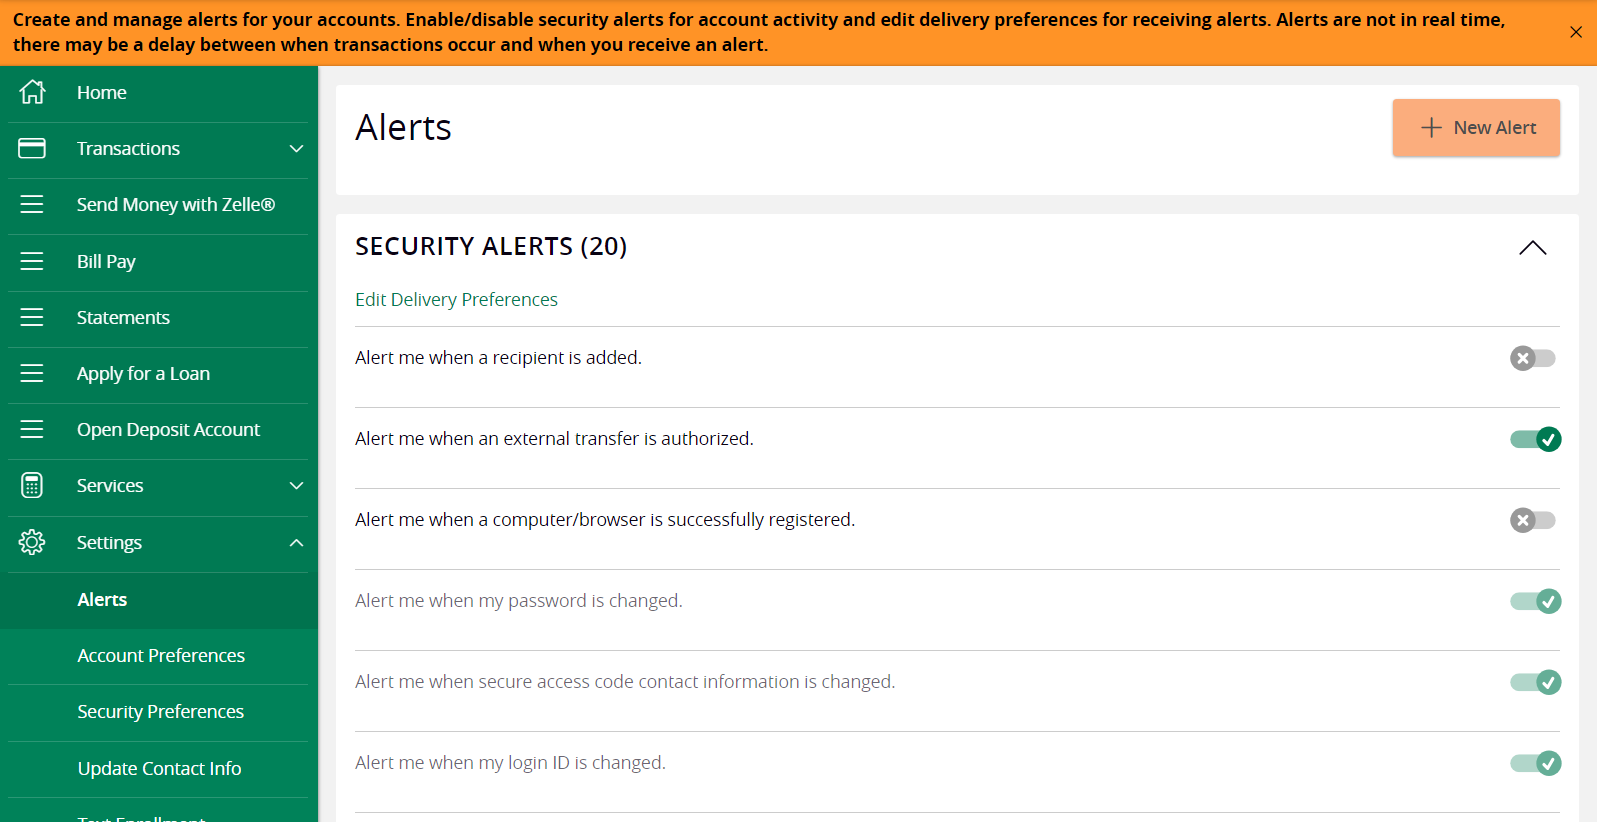 Security Alerts - Many New Choices